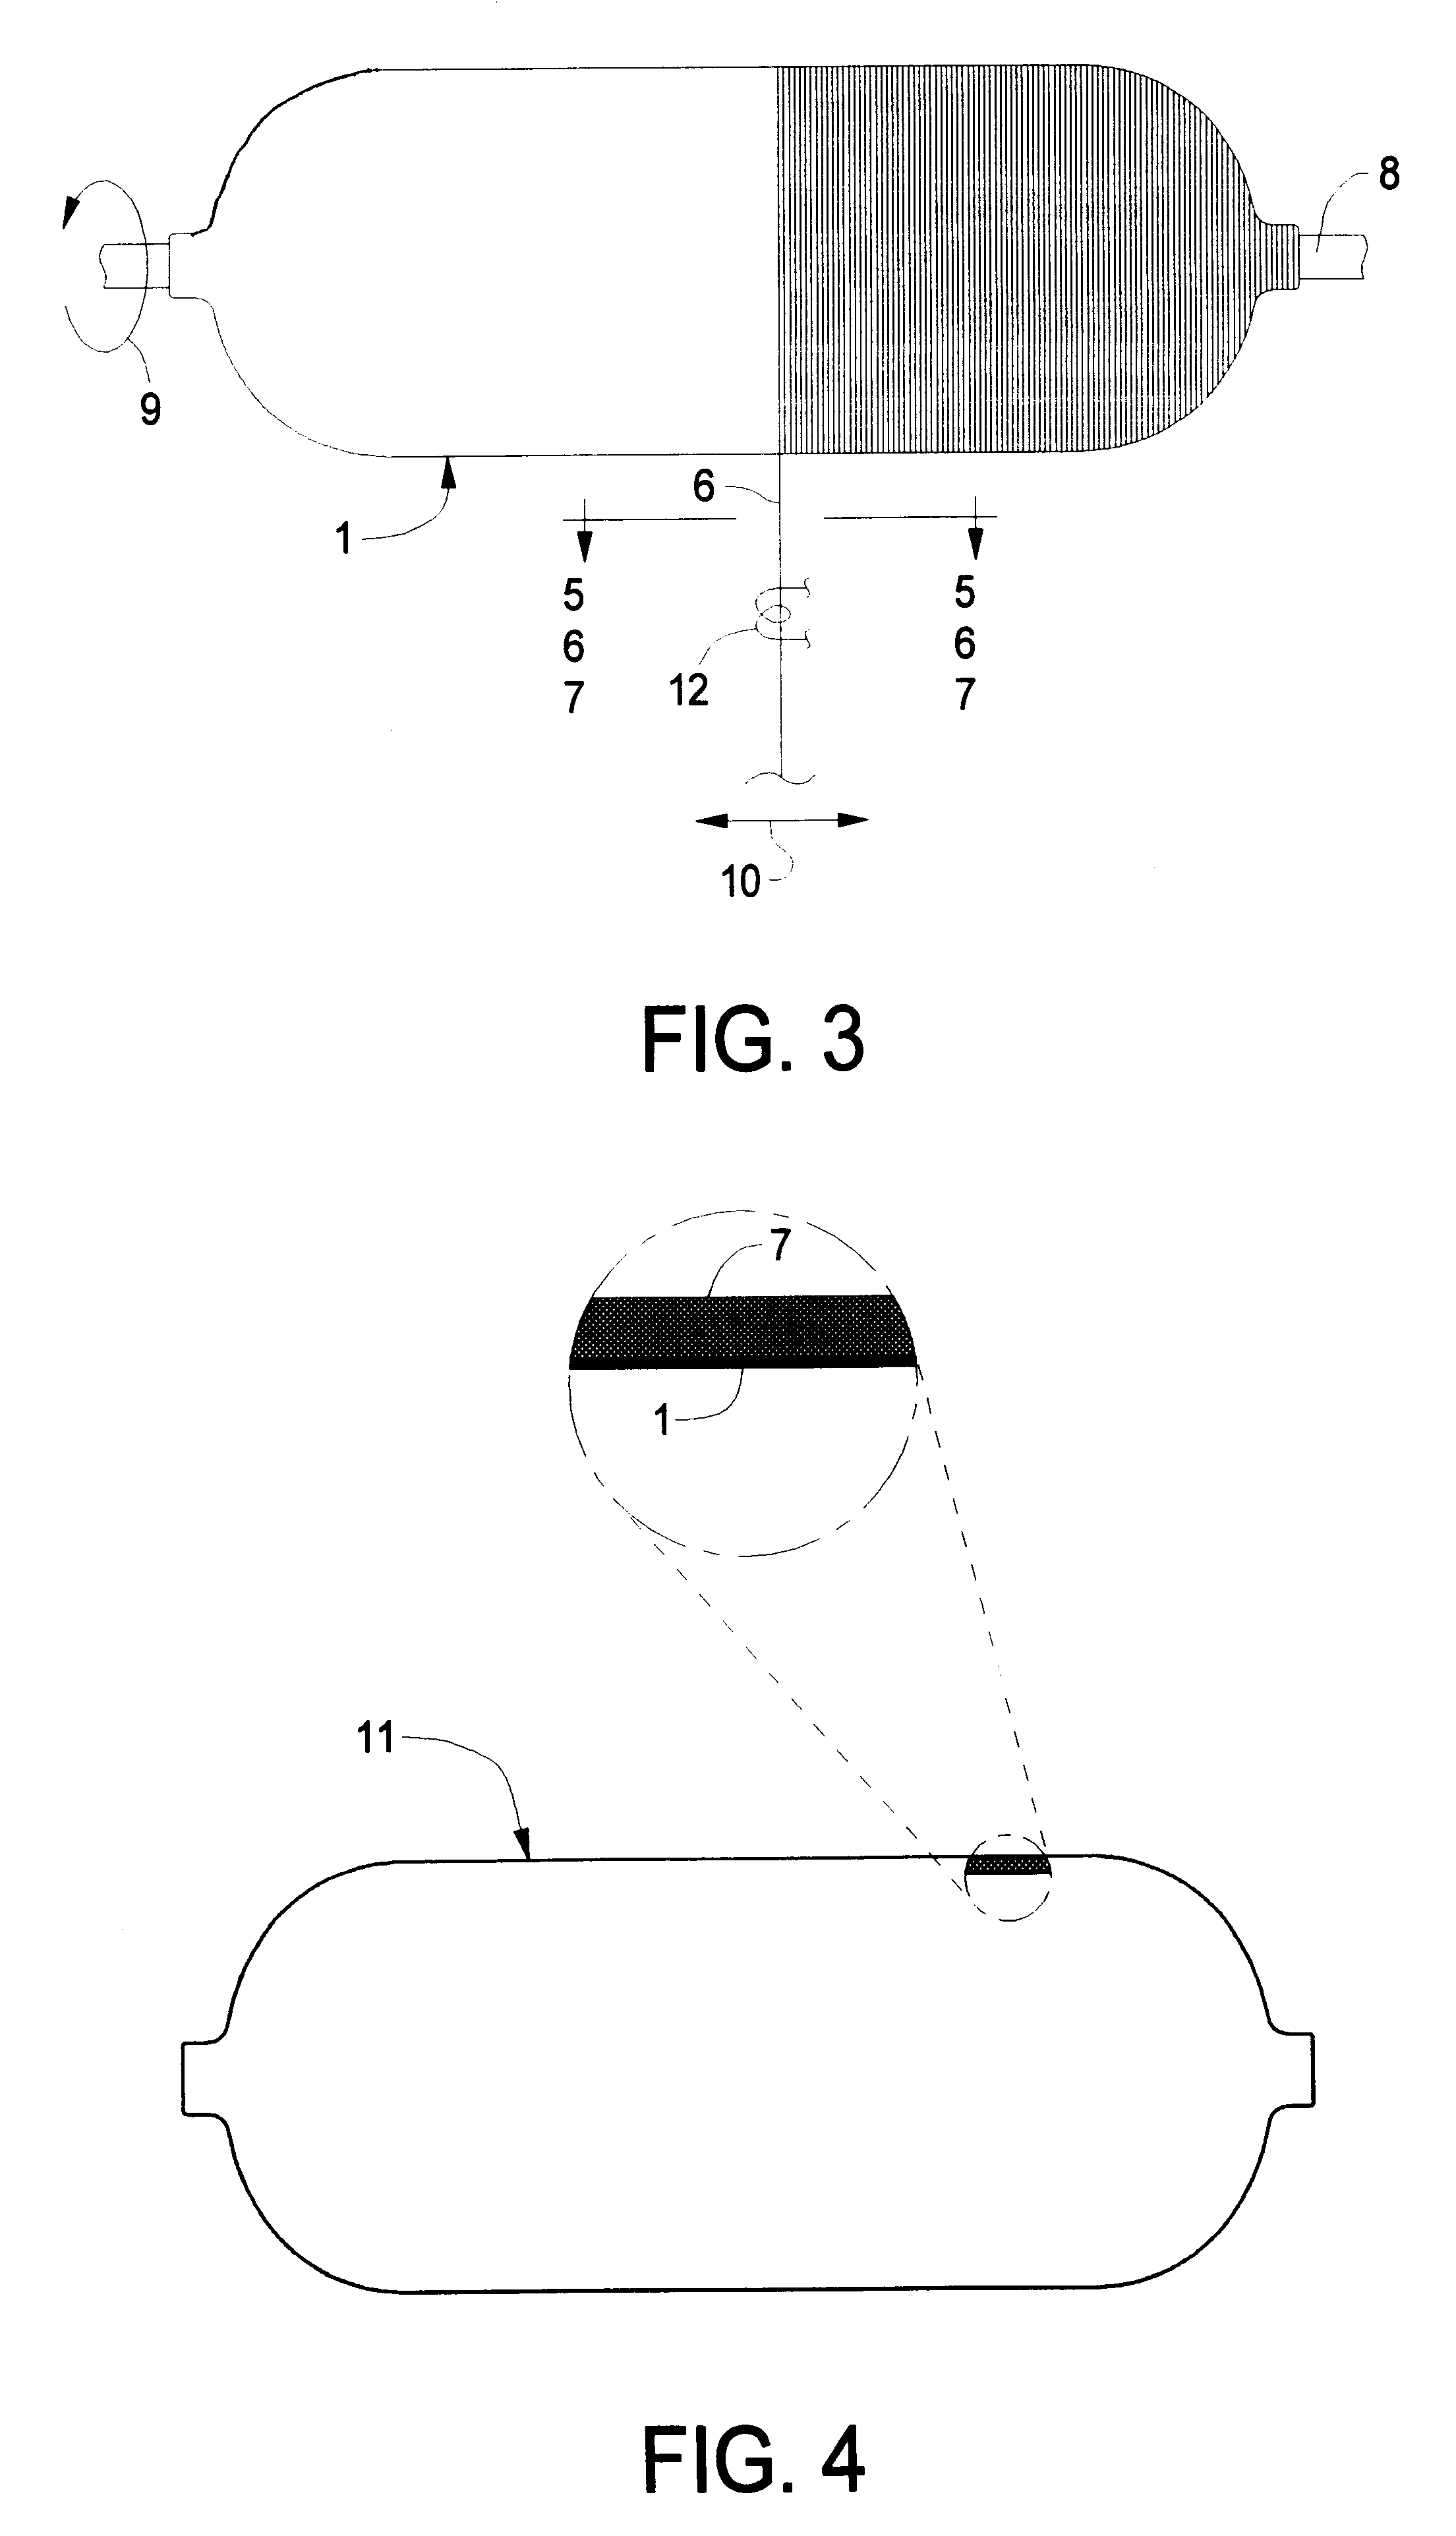 Method for making thermoplastic composite pressure vessels